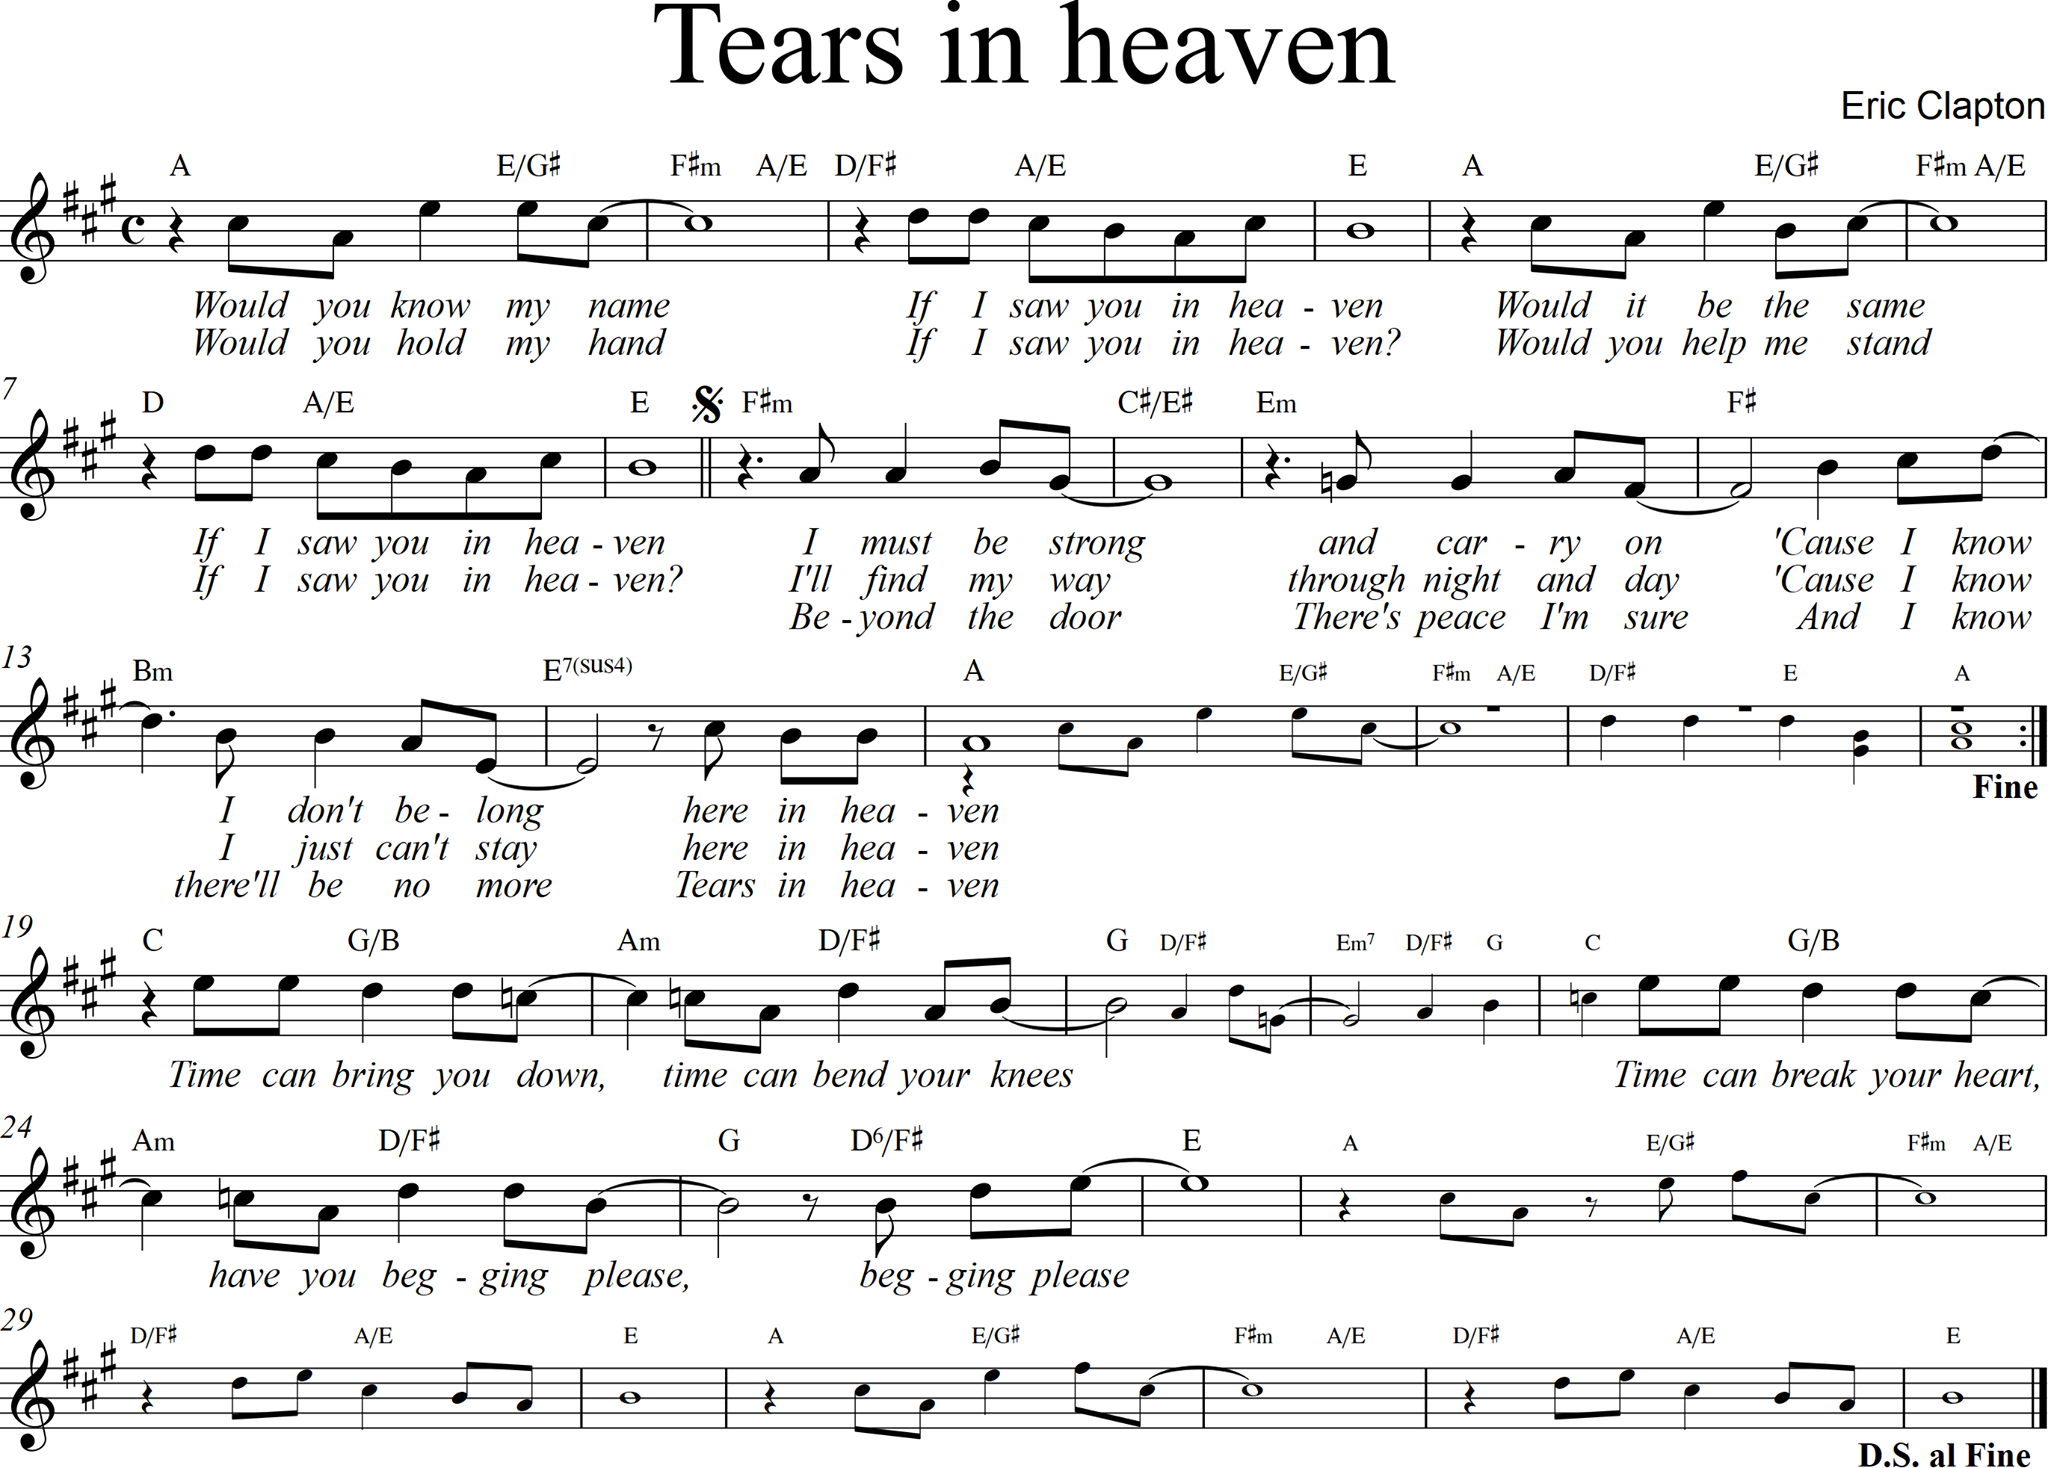 Tears in heaven arranged by masa sumide torrent bambus no invierno filme download torrent